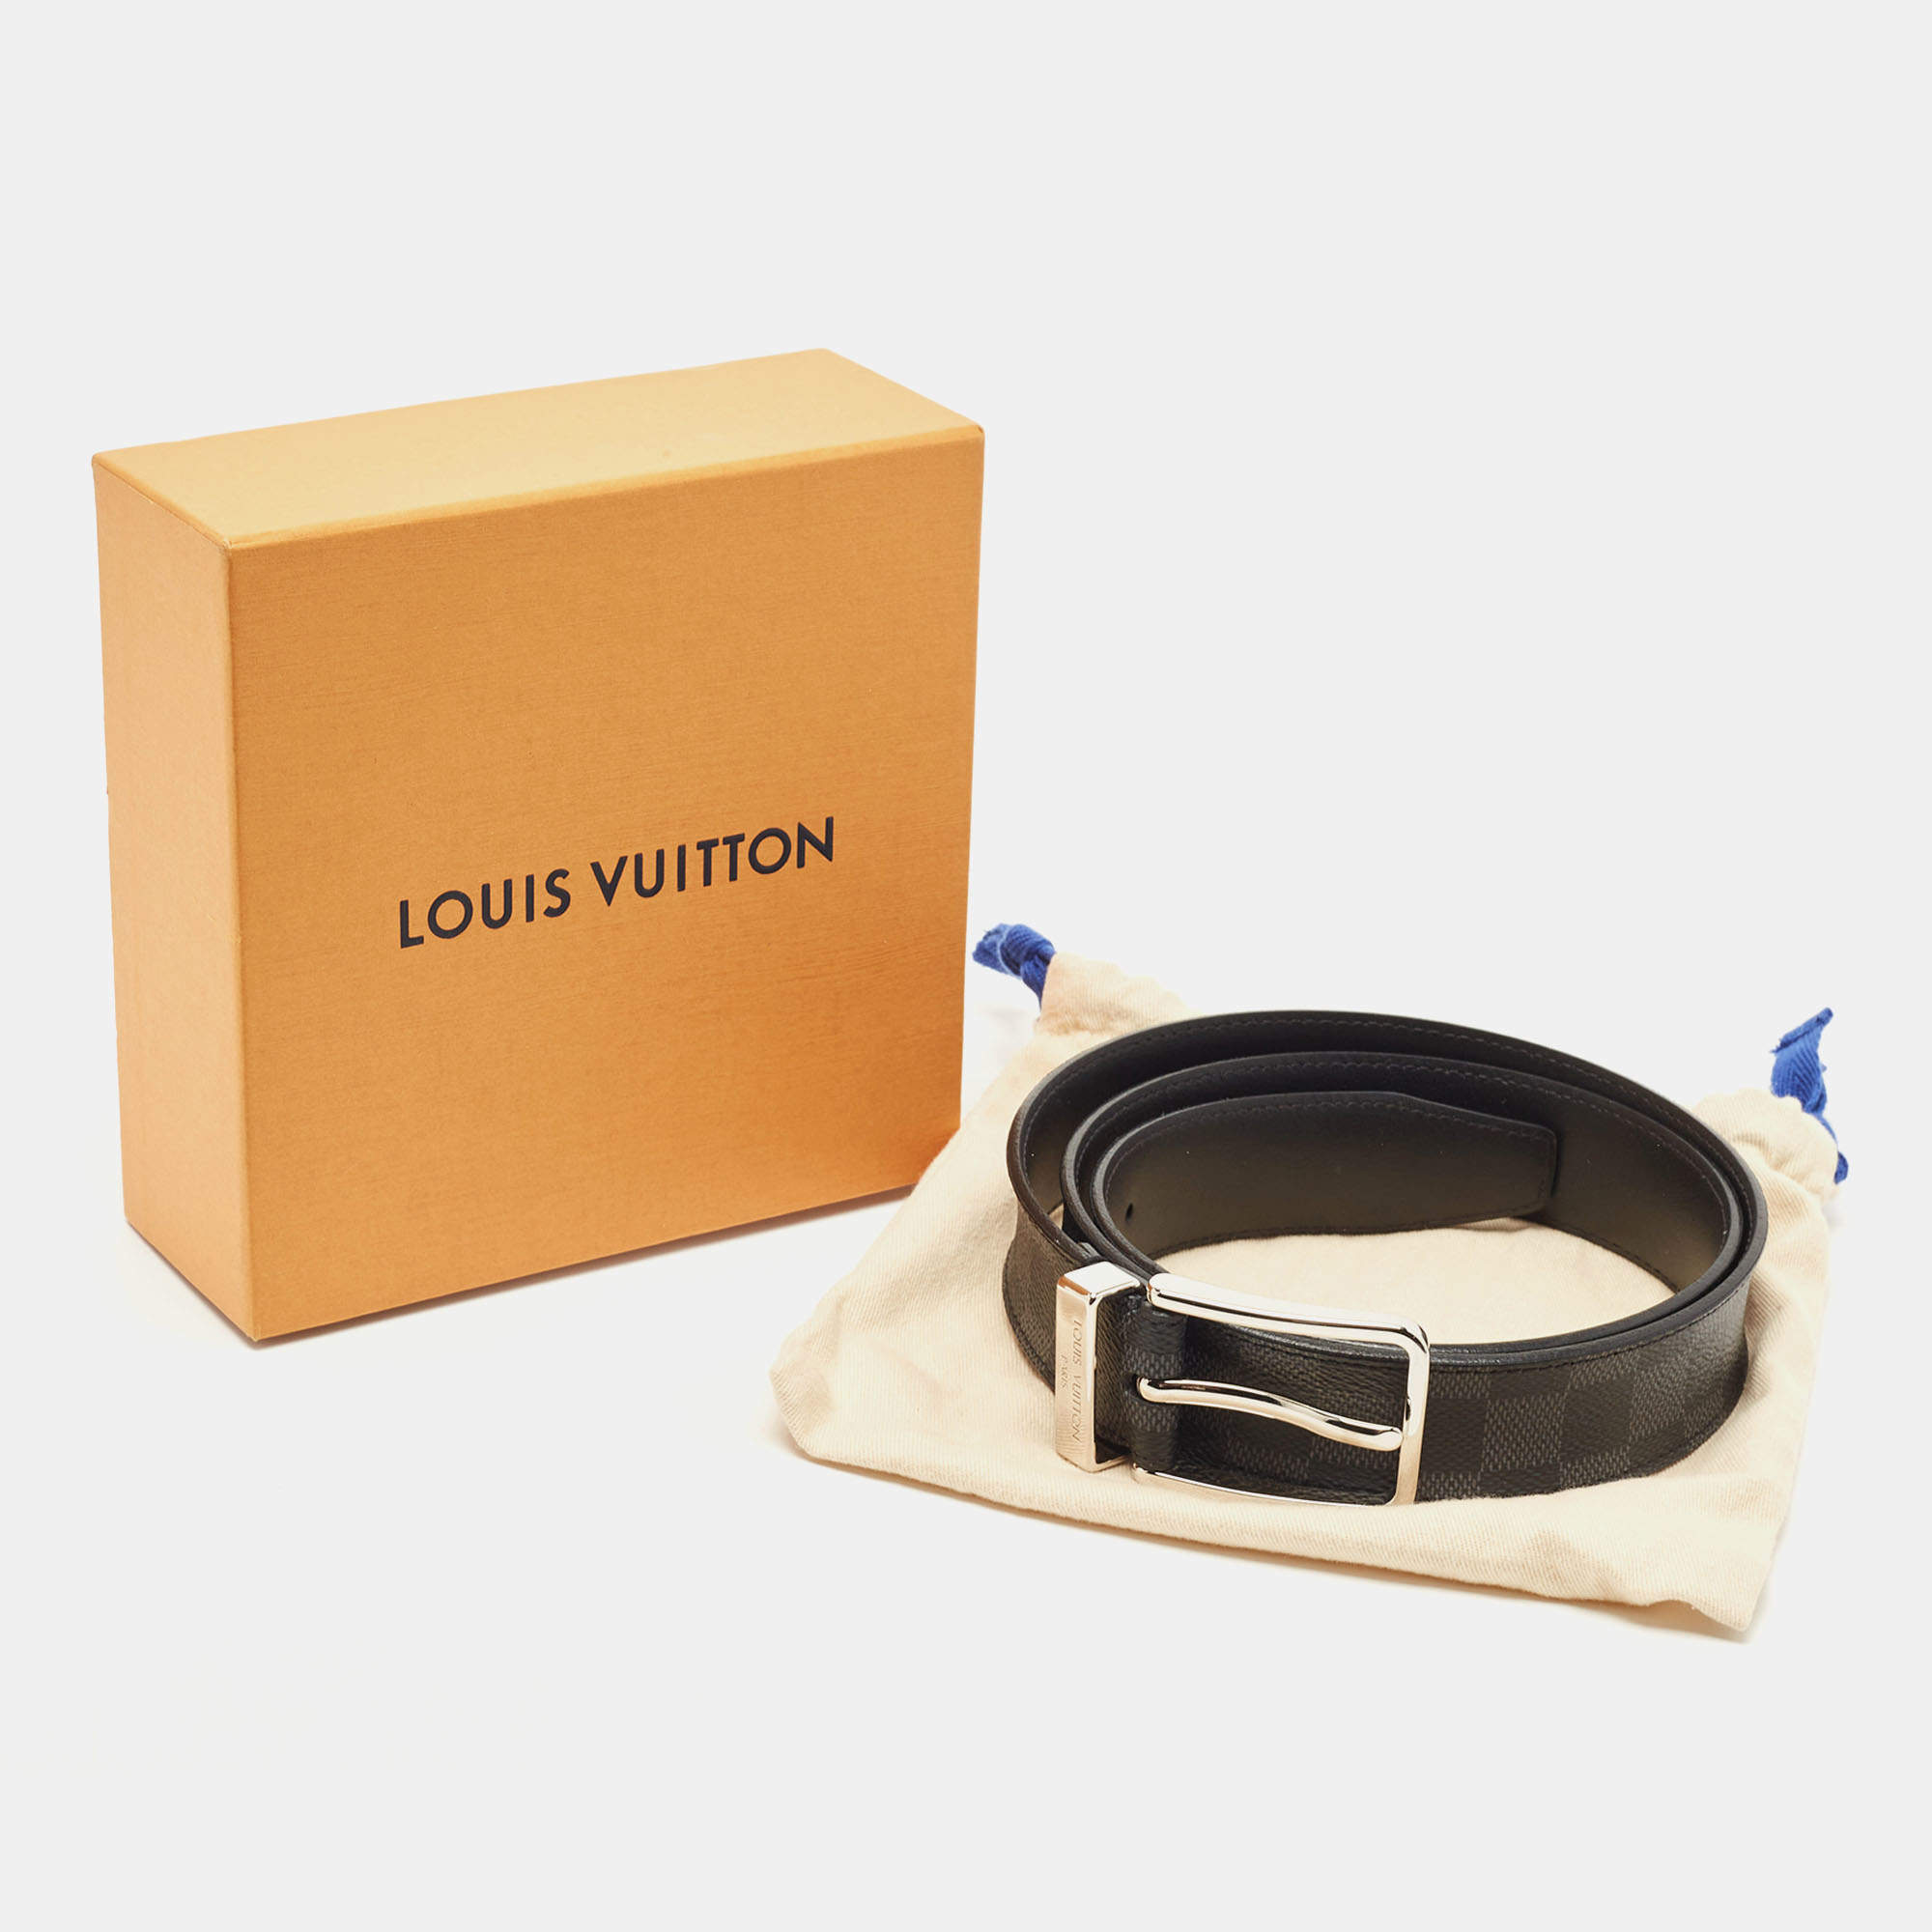 Buy [LOUIS VUITTON] Louis Vuitton Centure Pont Neuf Damier Cobalt M6067  Leather 90/36 Unisex Belt [Used] A-rank from Japan - Buy authentic Plus  exclusive items from Japan